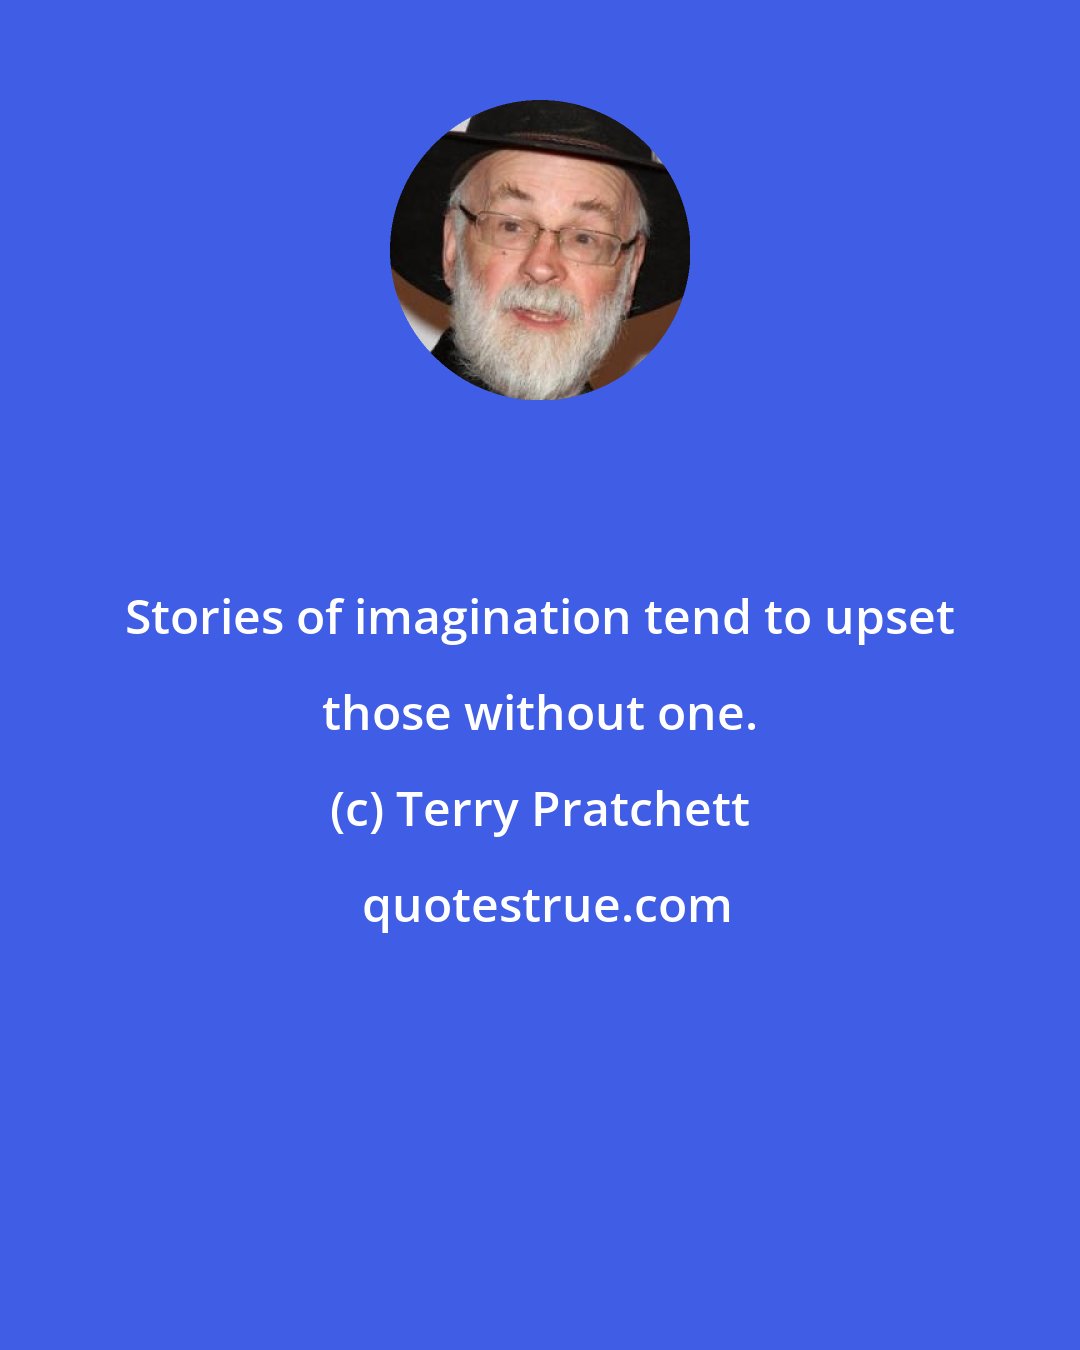 Terry Pratchett: Stories of imagination tend to upset those without one.